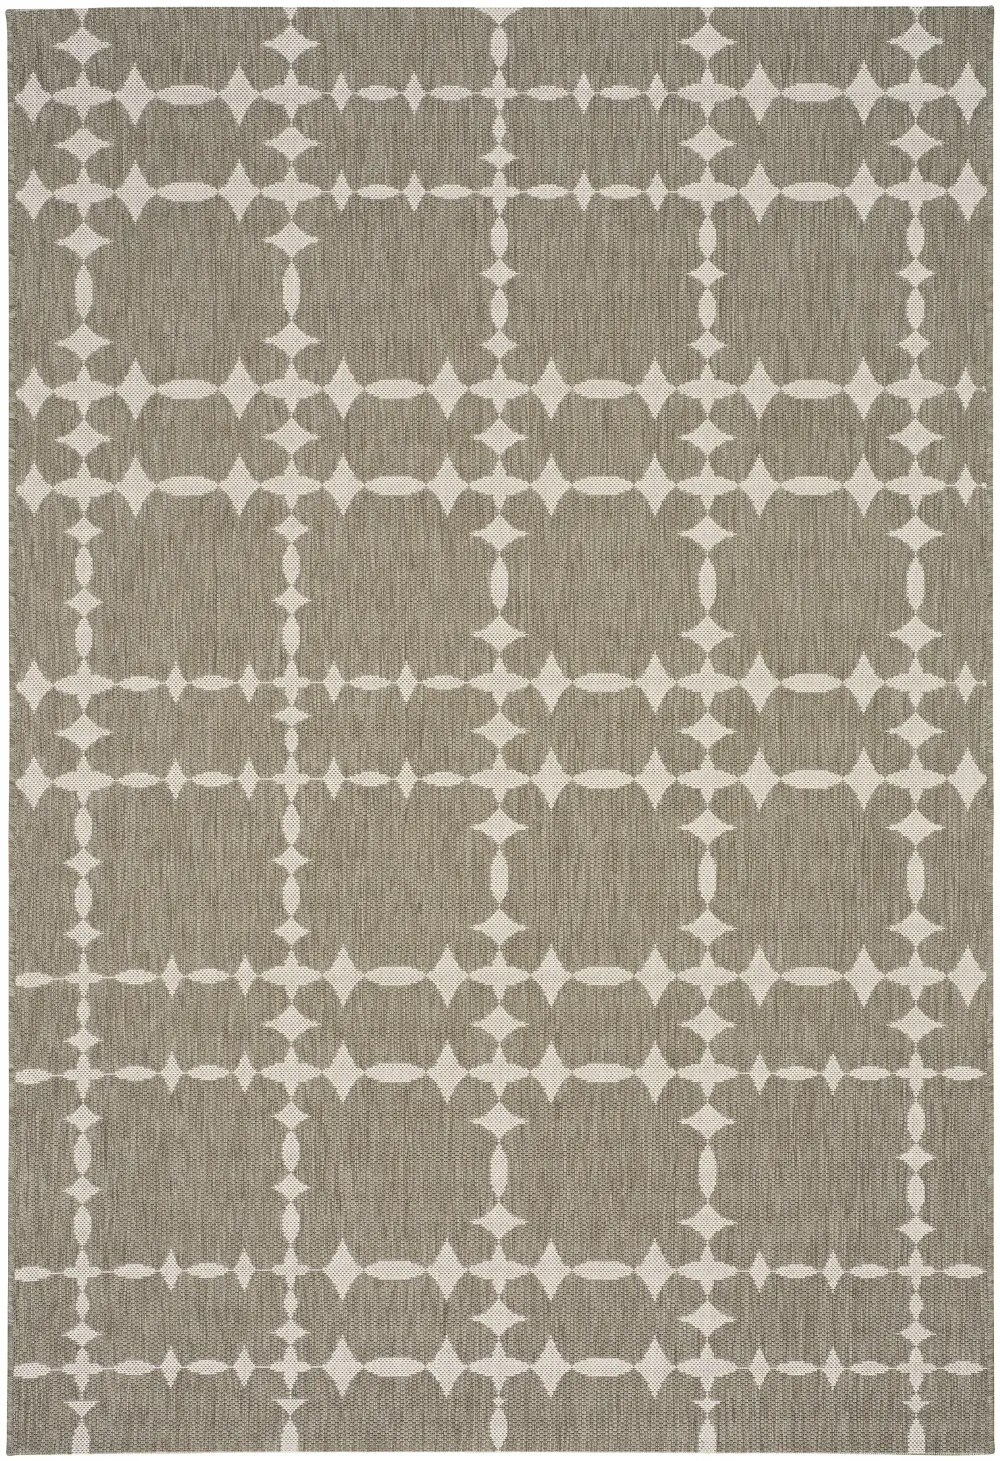 4738RS03110506675 4 x 6 Small Barley Tan Indoor-Outdoor Rug - Finesse-Tower Court-1